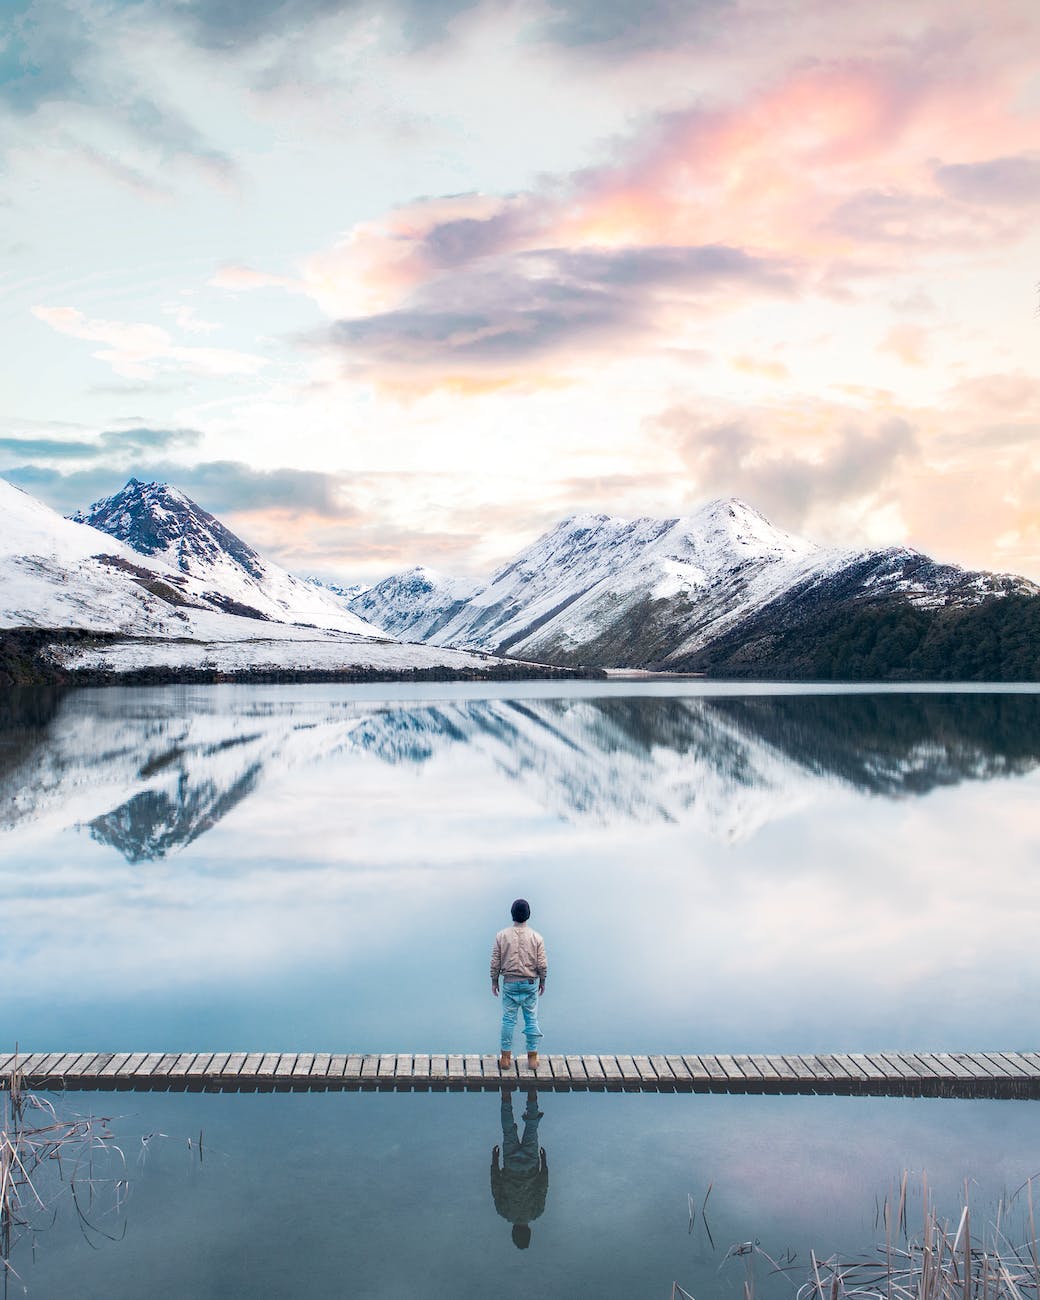 back view of a person standing on wooden planks across the snow capped mountains